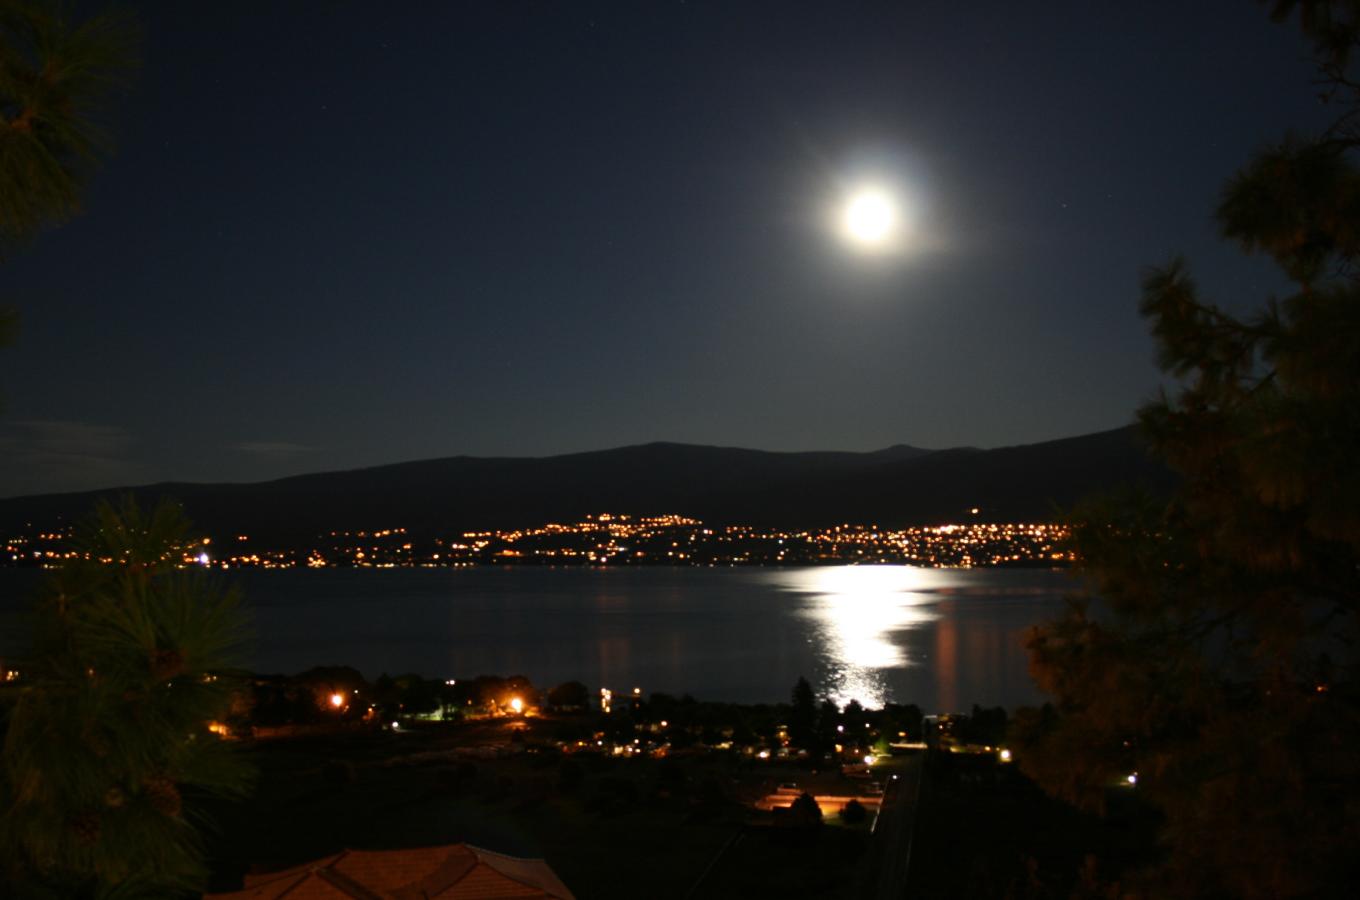 How romantic - watch the full moom shimmering over Lake Okanagan from your deck.